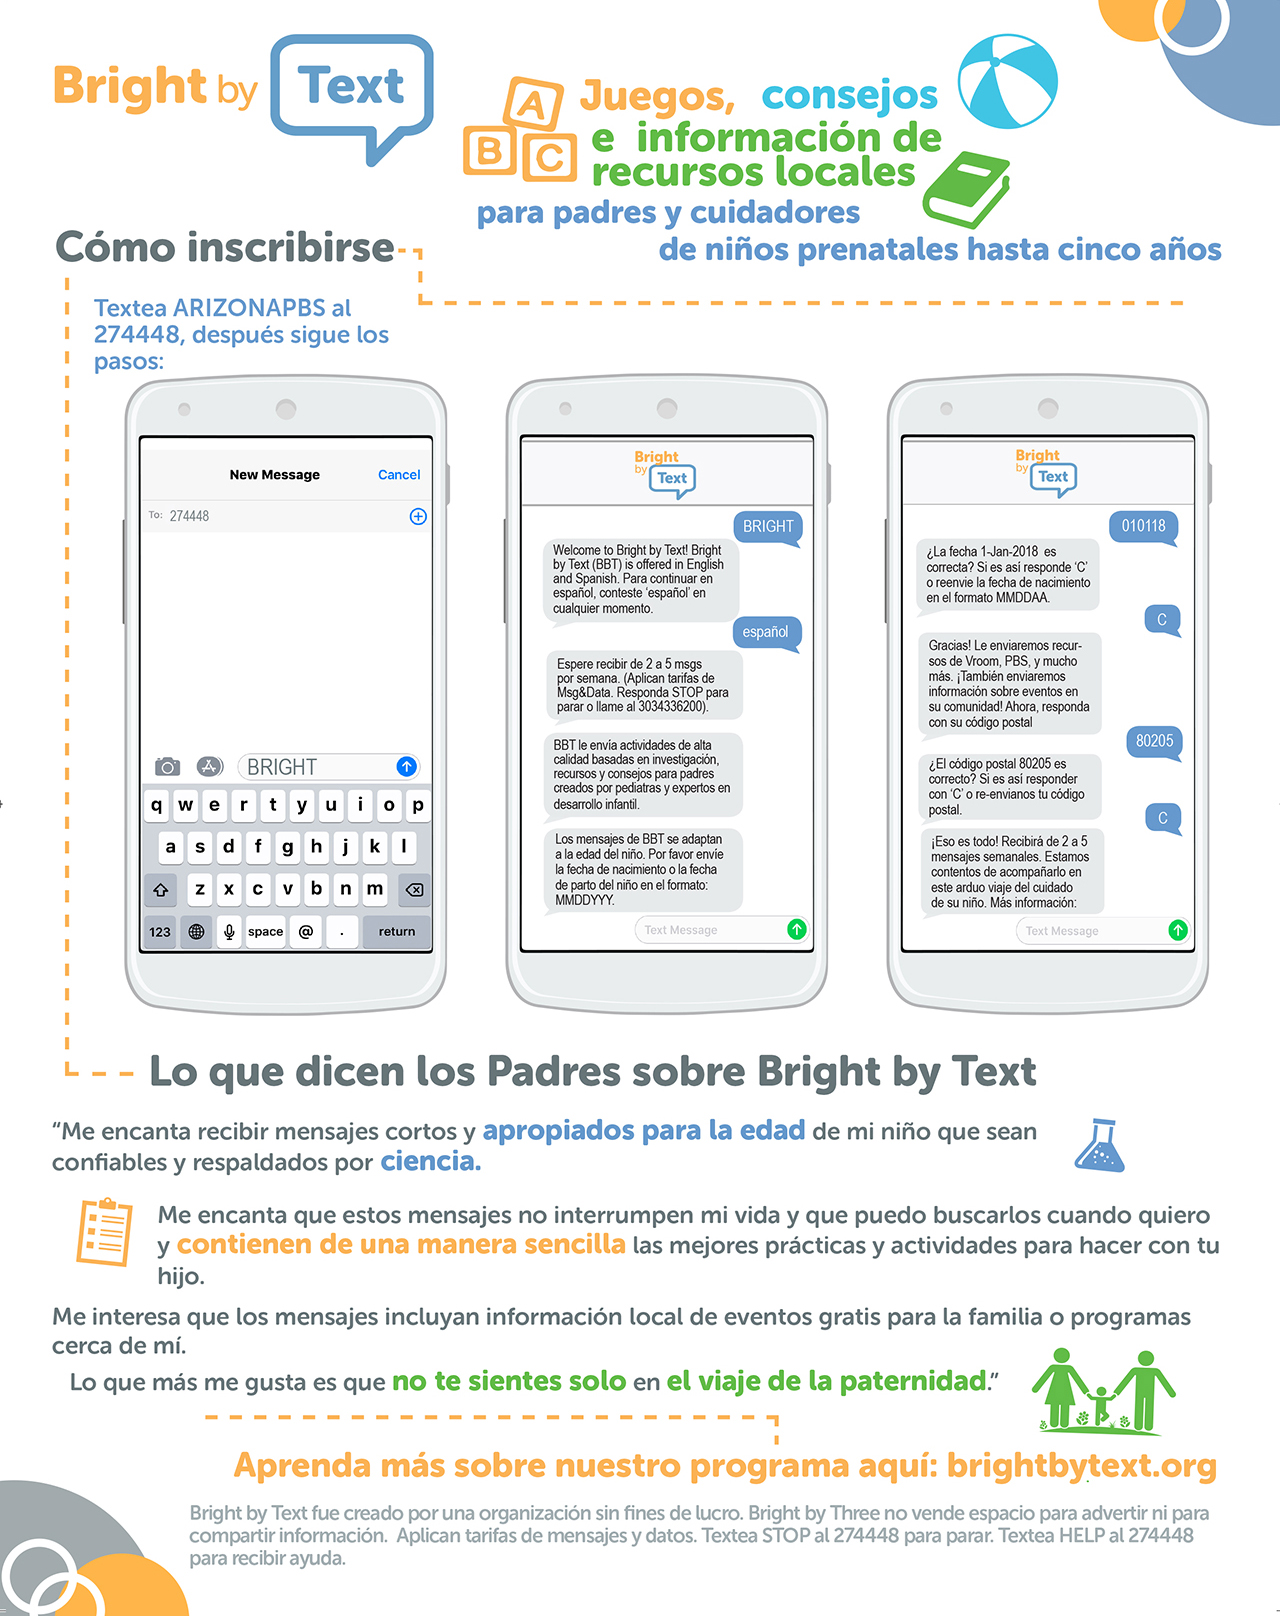 Bright by Text - Spanish